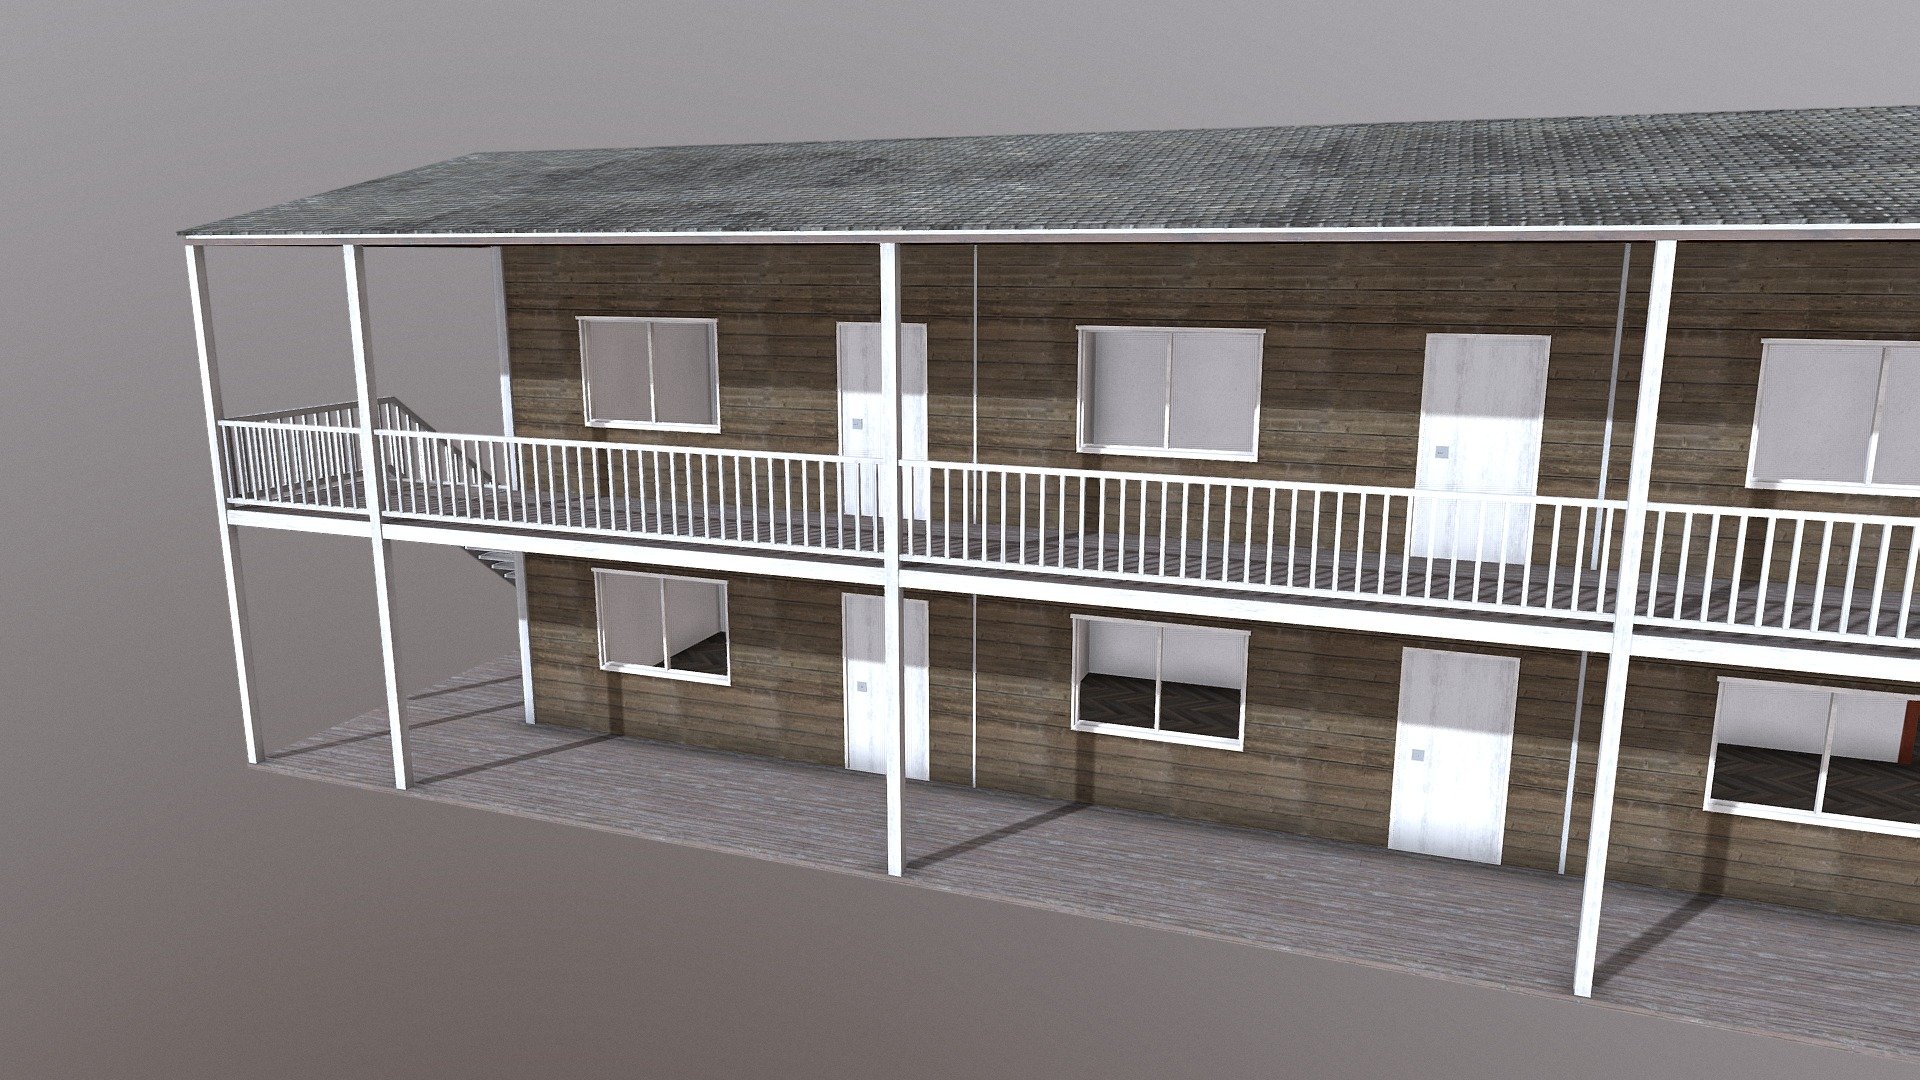 A large Motel with a rustic exterior.The exterior has a weathered wood texture on the exterior walls, stairs, railings, windows and roof as well as smaller details such as pipes and drains. Doors are modeled separately so you can move and pivot them easily.Works great in any modern game engines and for rendering purposes.

Available in: dae ,fbx ,3ds ,obj ,mtl.

Textures for the motel are 4096x4096 resolution:


Diffuse
Normal map
Ambient Occlusion

For any help or inquiries please message me directly onSketchfab or on my email: howardcoates95@gmail.com - Motel - Buy Royalty Free 3D model by HowardCoates 3d model